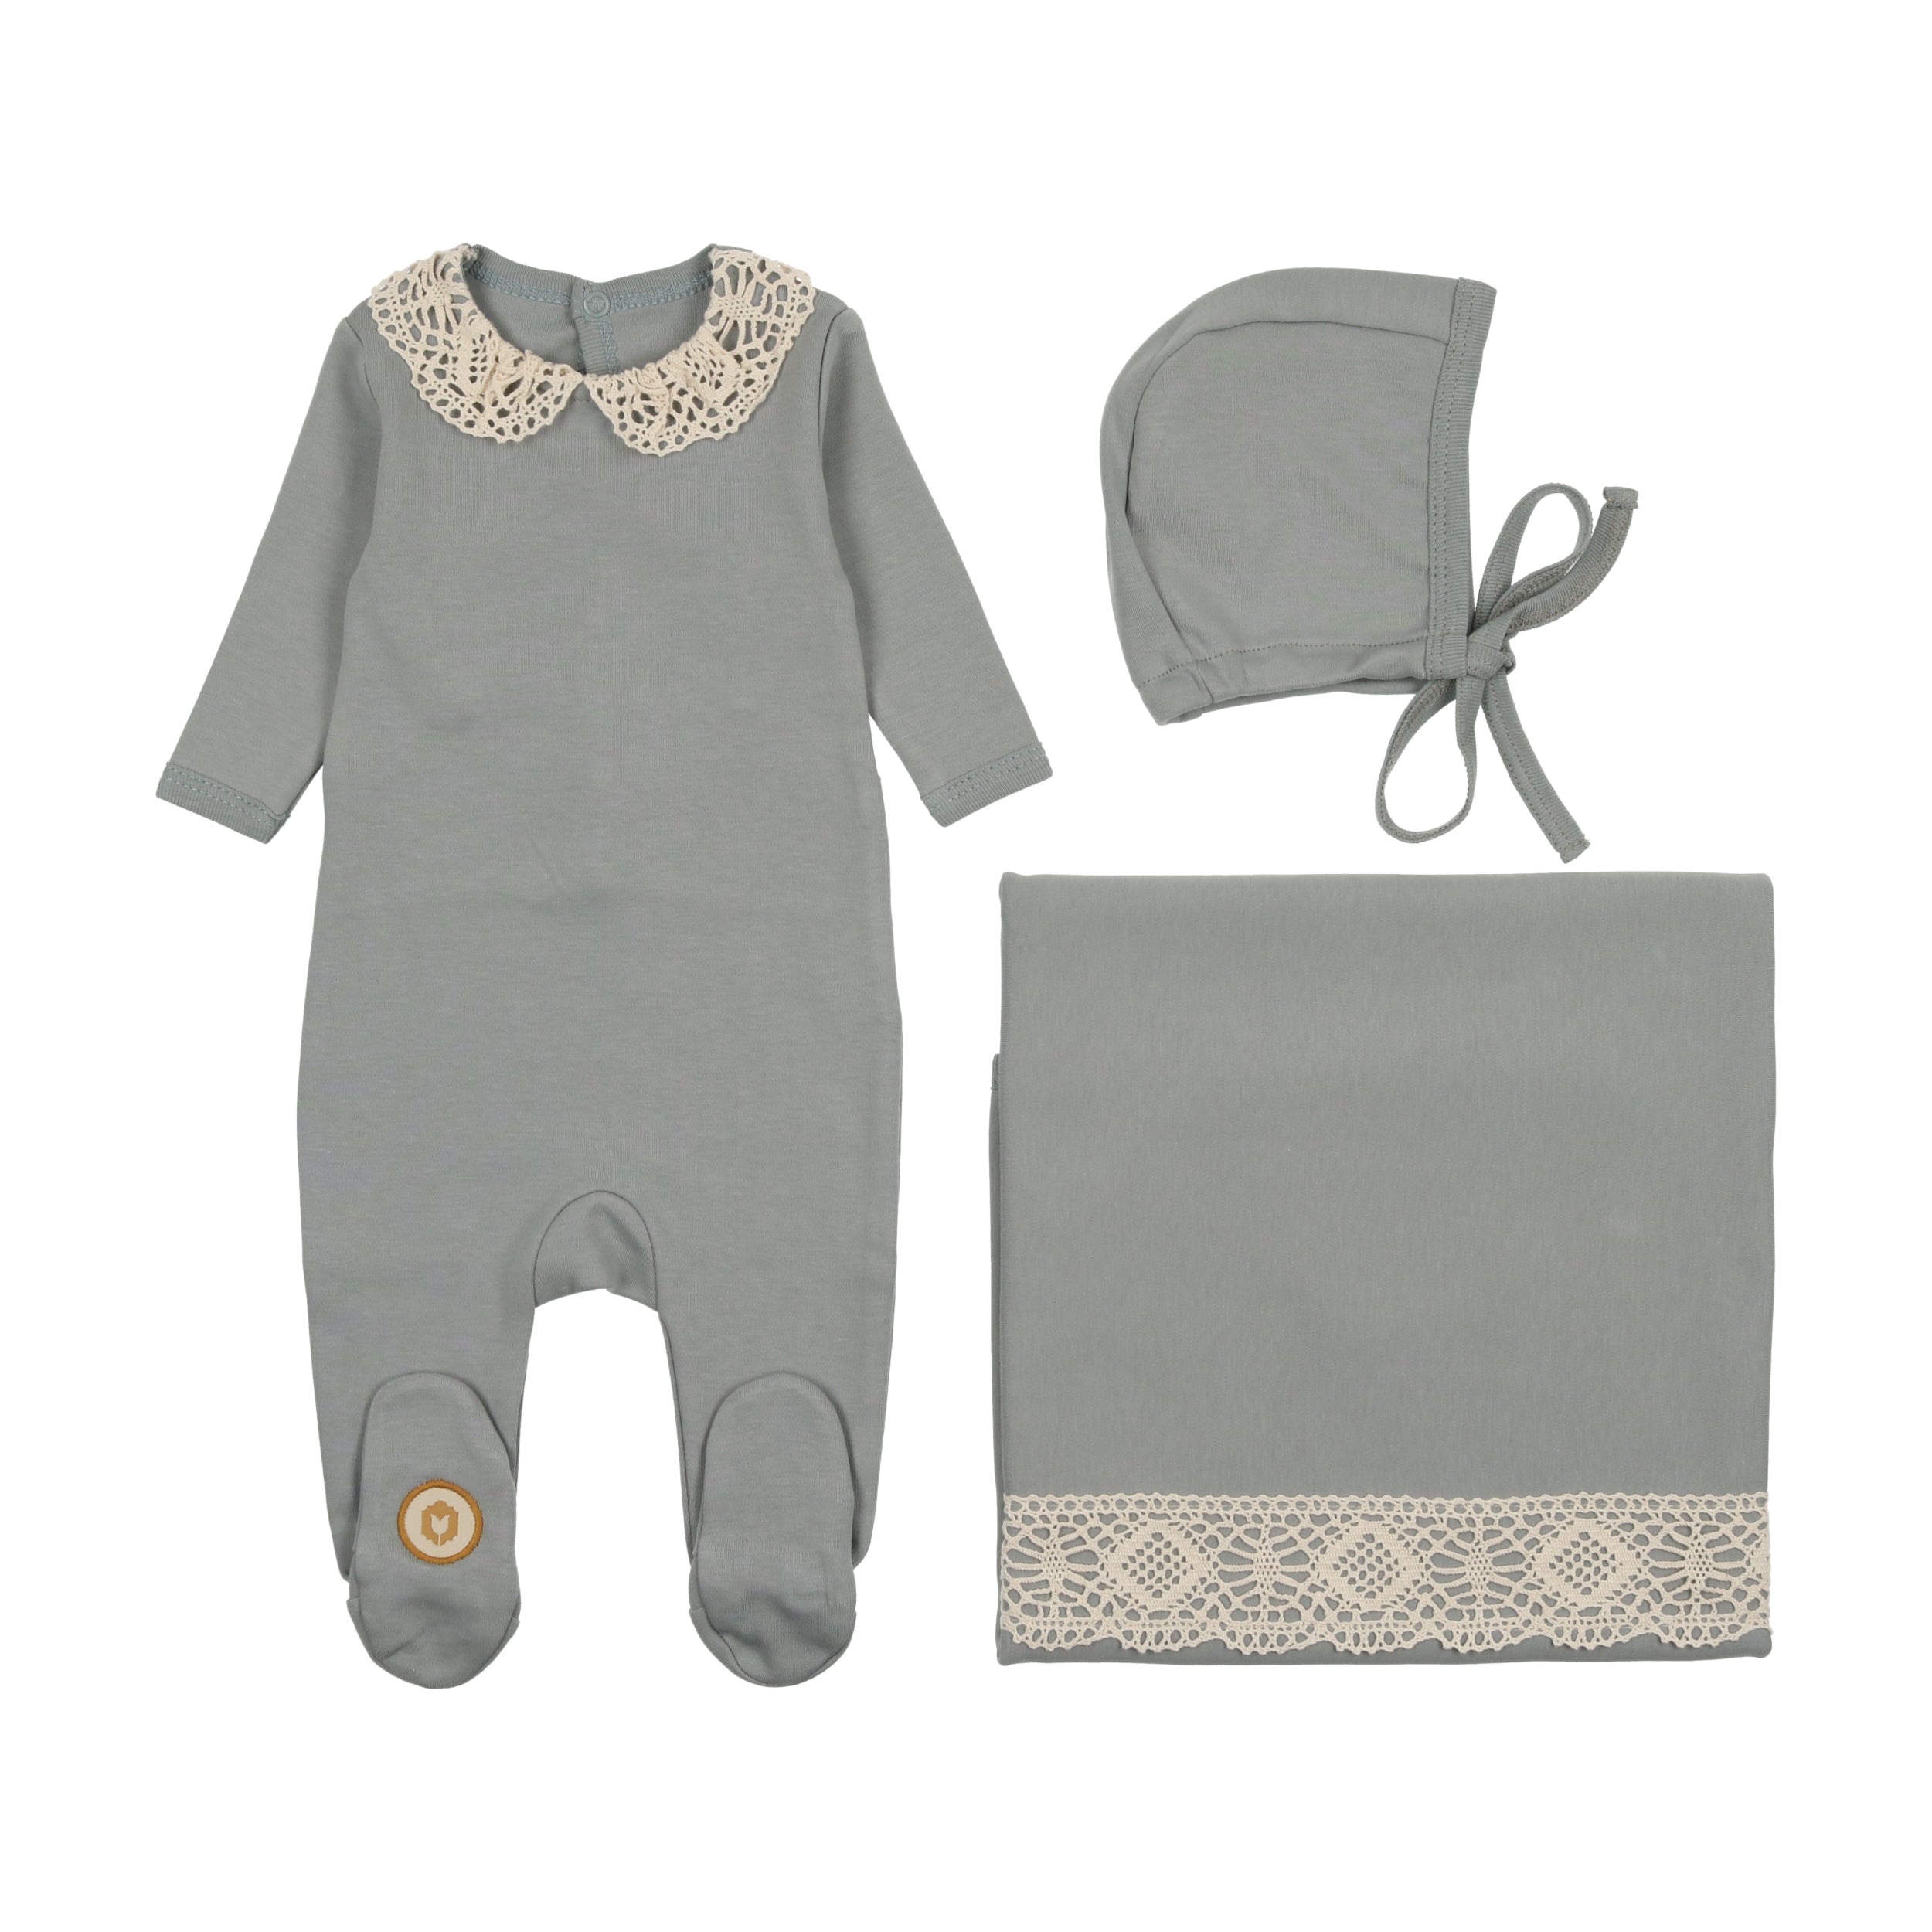 Collar And Crochet Layette Set